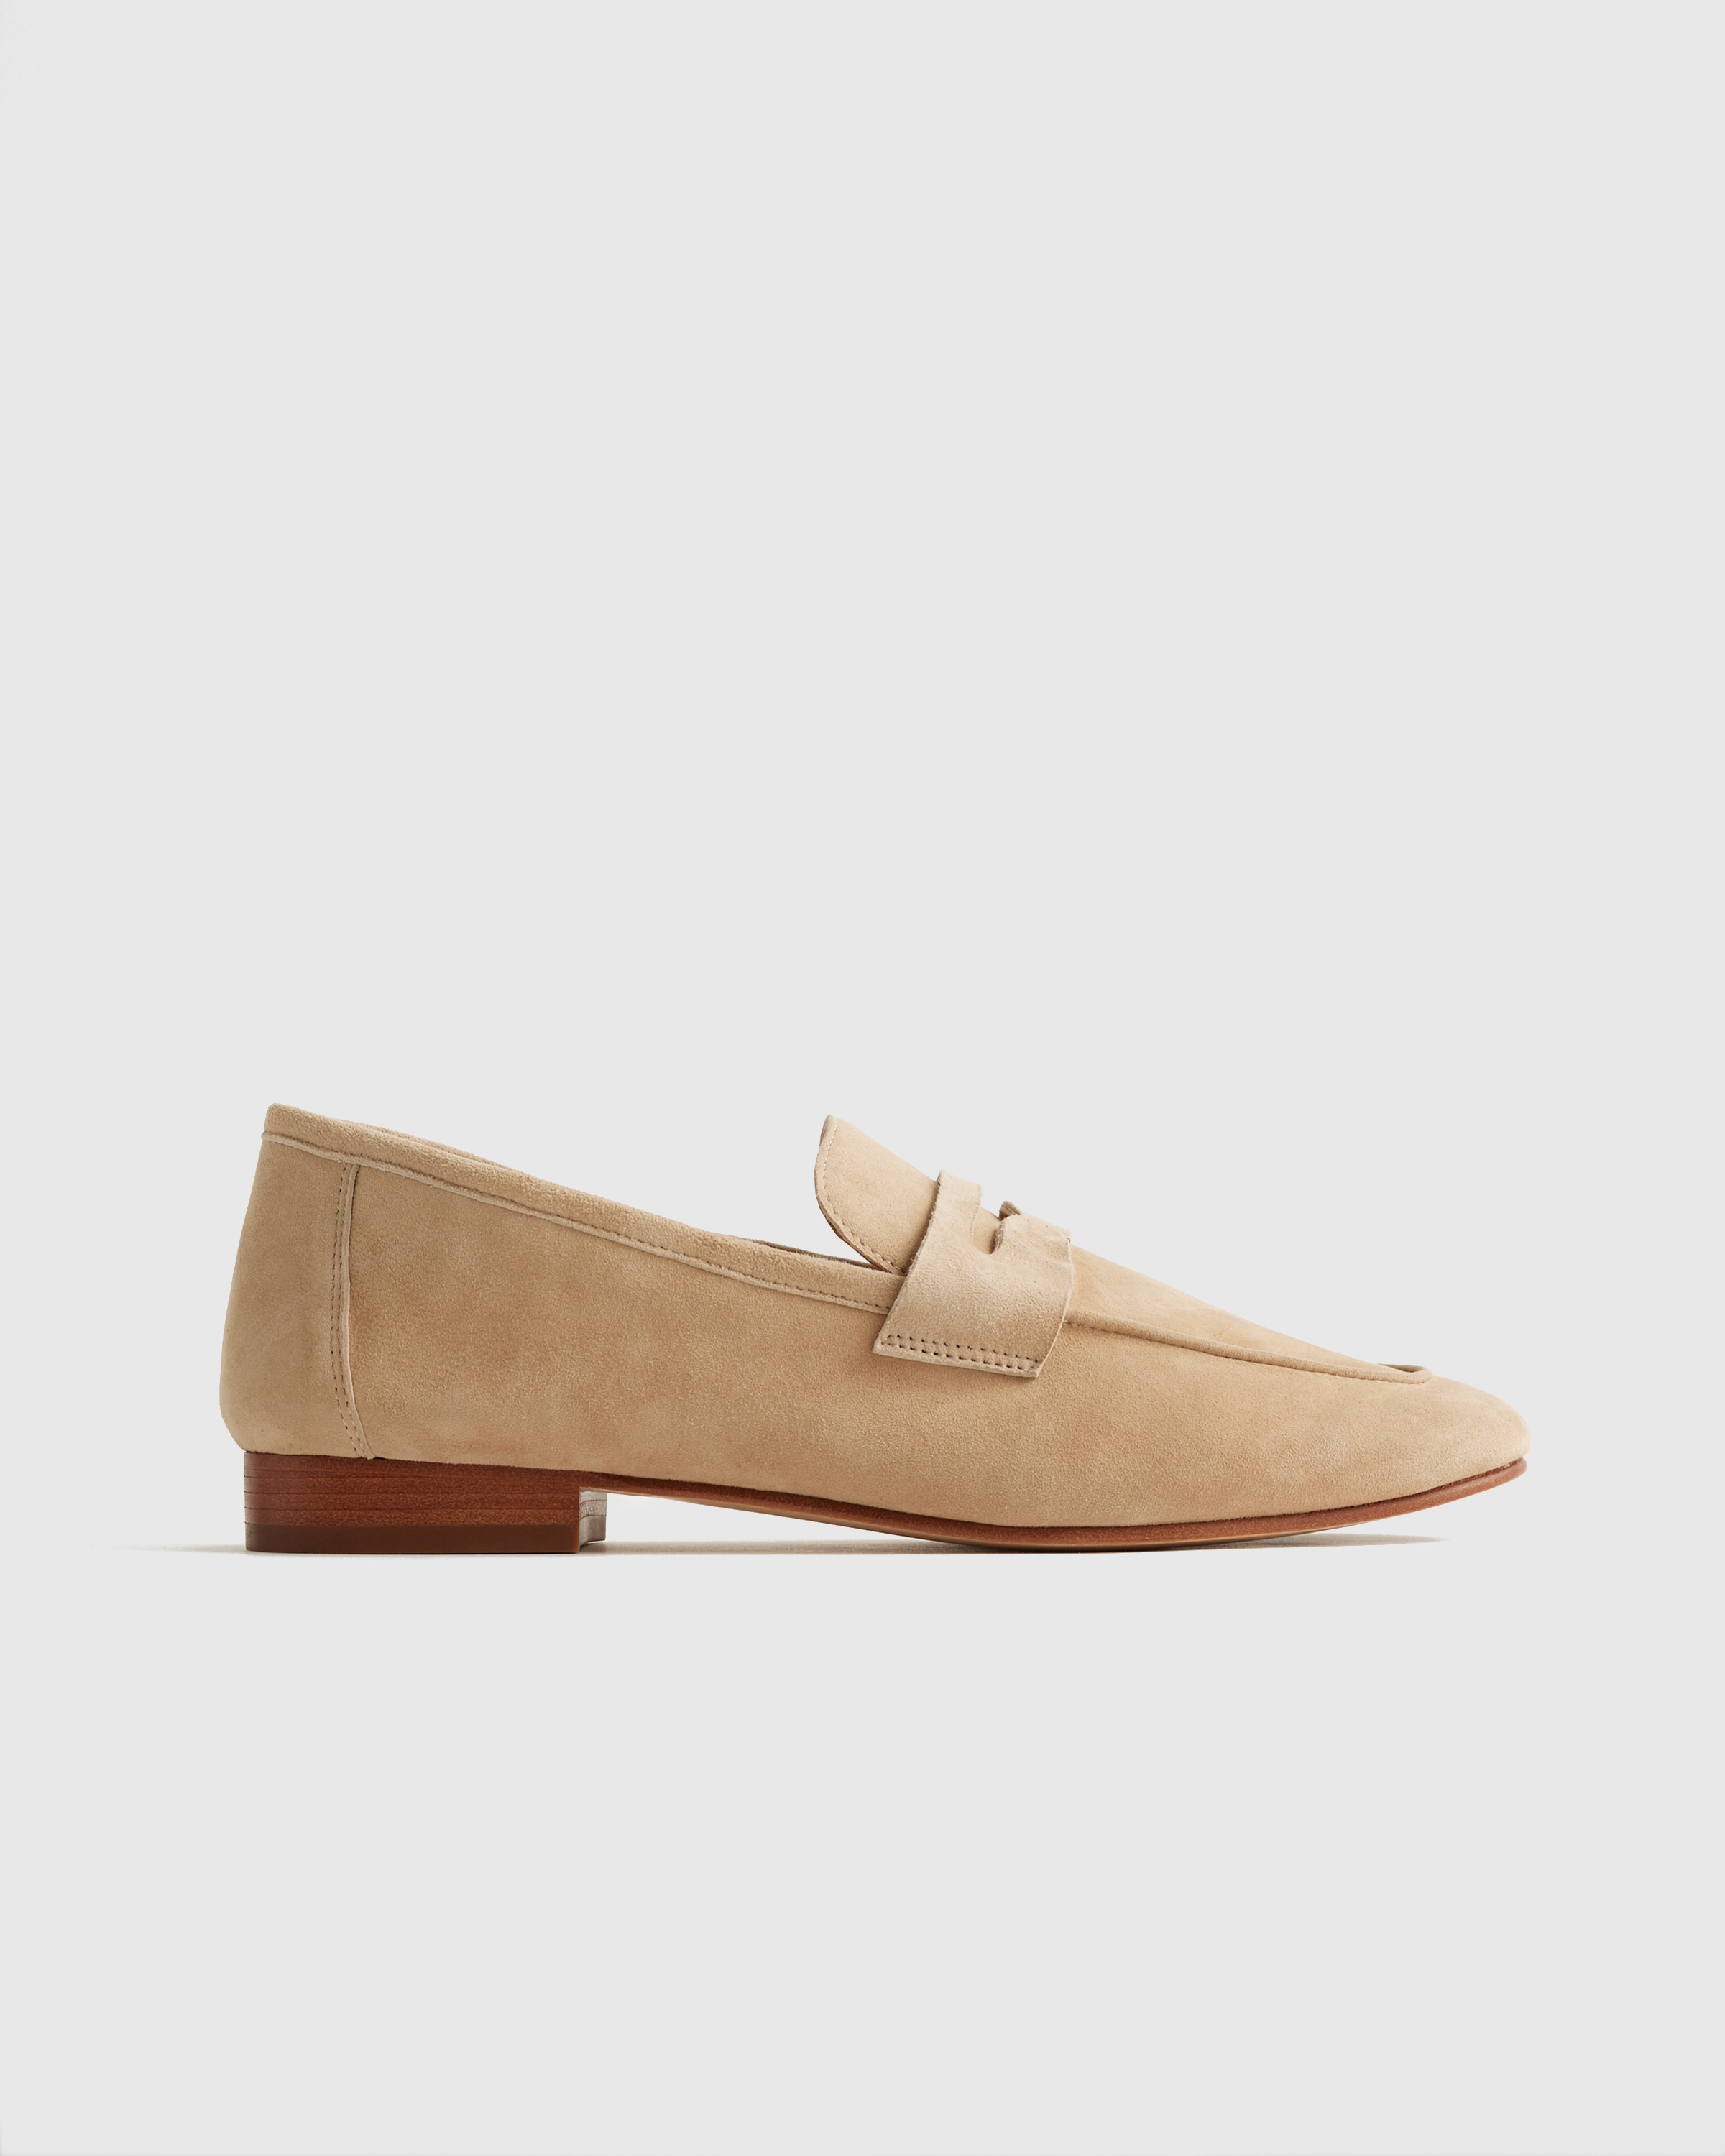 Quince Women's Italian Suede Penny Loafer In Almond